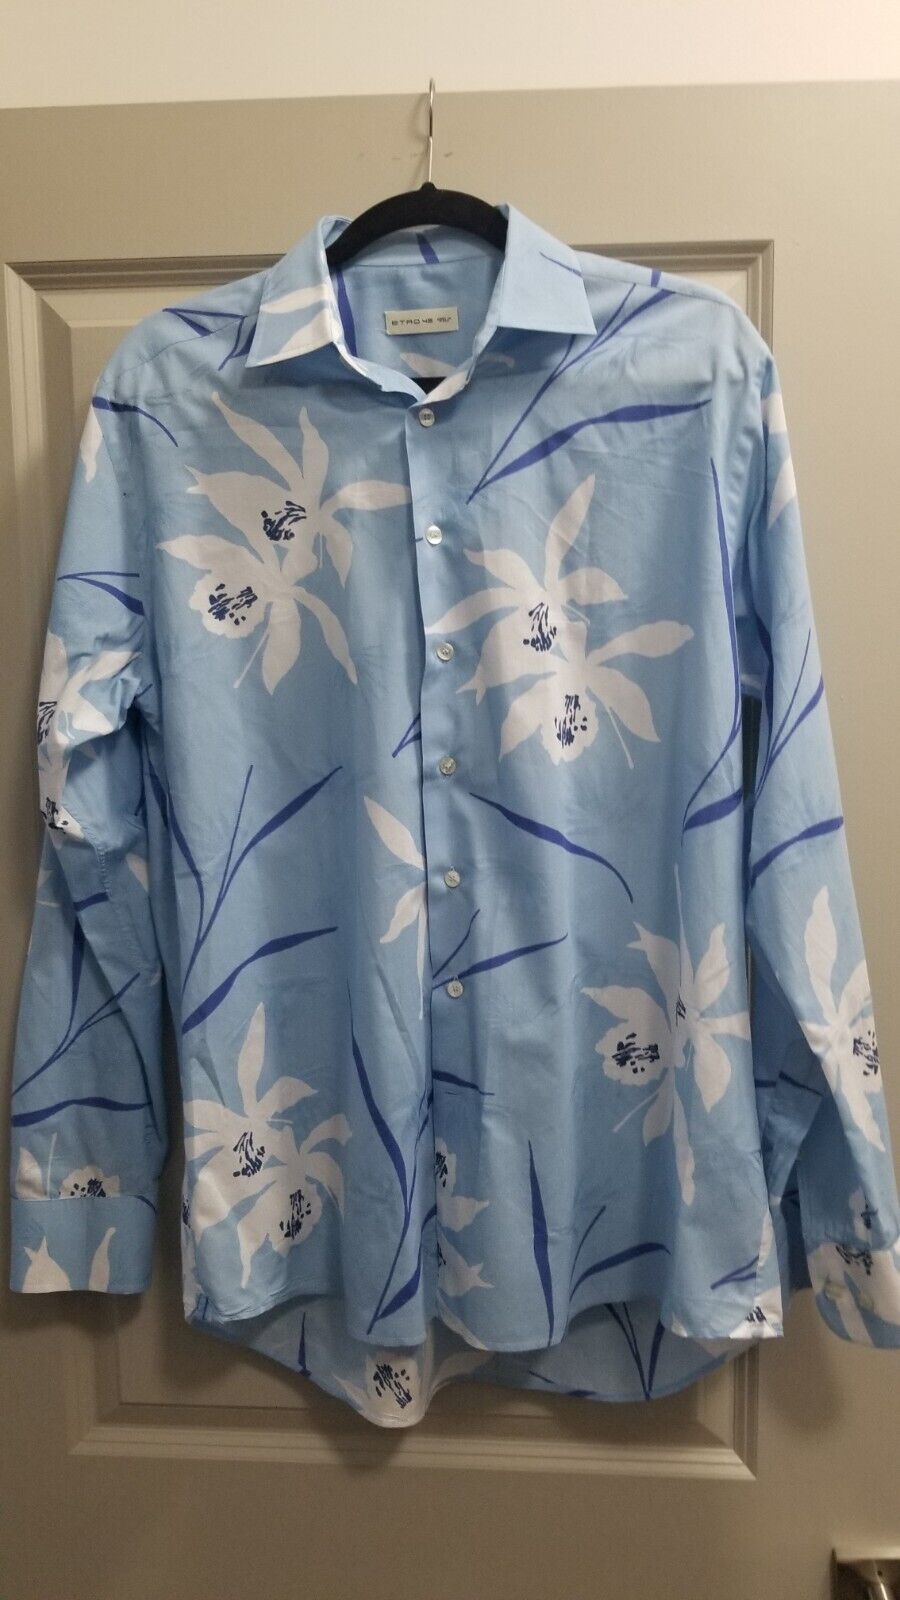 ETRO Mens Size 42 Shirt Floral Print Button Down L/S Made in Italy reg. $350.